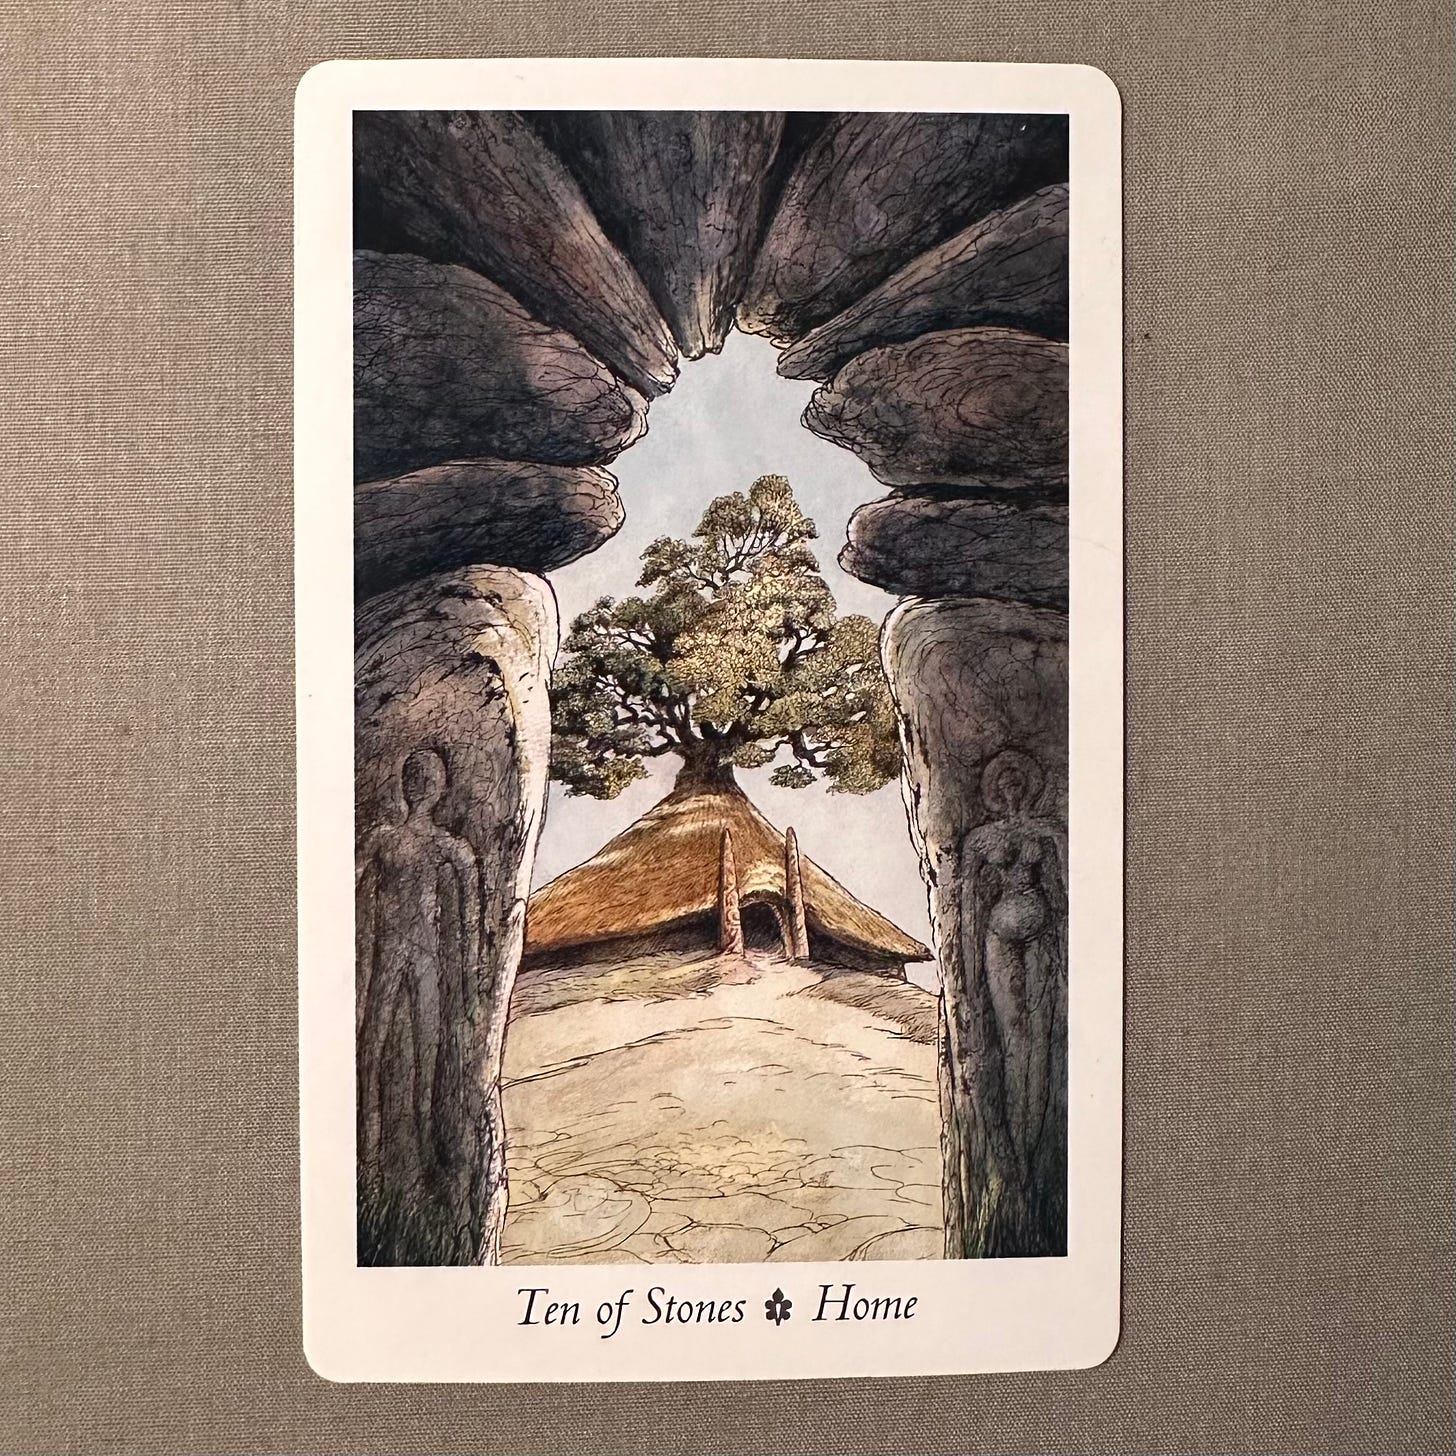 A tarot card lies on sage green fabric. The picture is bordered in white with the words Ten of Stone - Home written below it in black ink. The picture depicts the following: A great arch made up of ten weathered stones frames the picture. Through this gate we glimpse an Iron Age round house with a path leading to it. From the thatched roof of the house rises a mighty apple tree. Carved into the two lowest stones of the great arch are rough-hewn male and female figures.